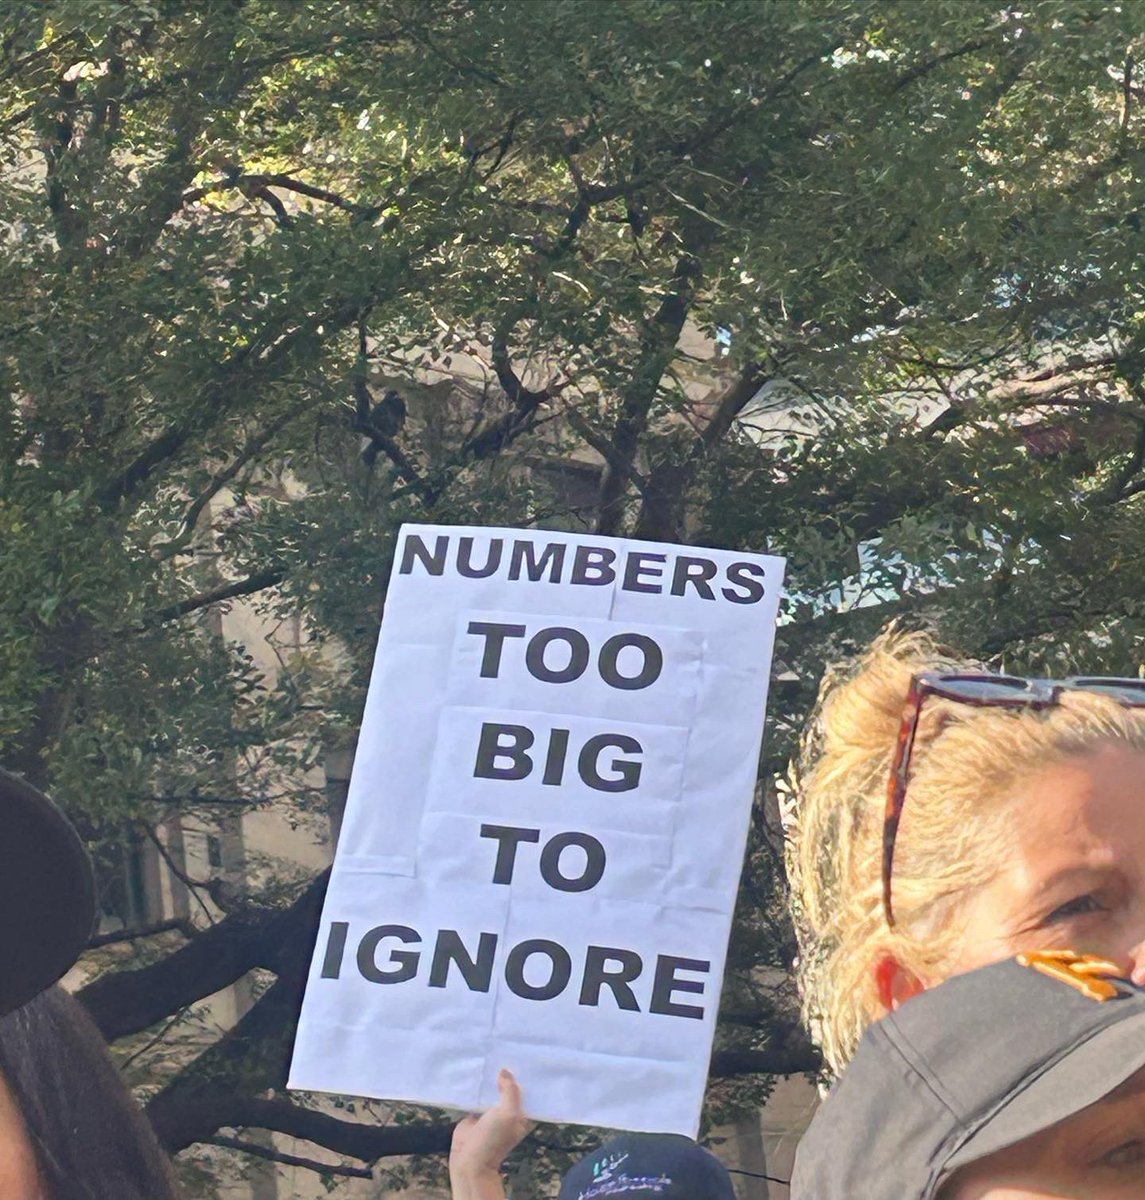 Great signs spotted at the Naarm / Melbourne rally this morning calling for an end to violence against women #enoughisenough #violenceagainstwomen